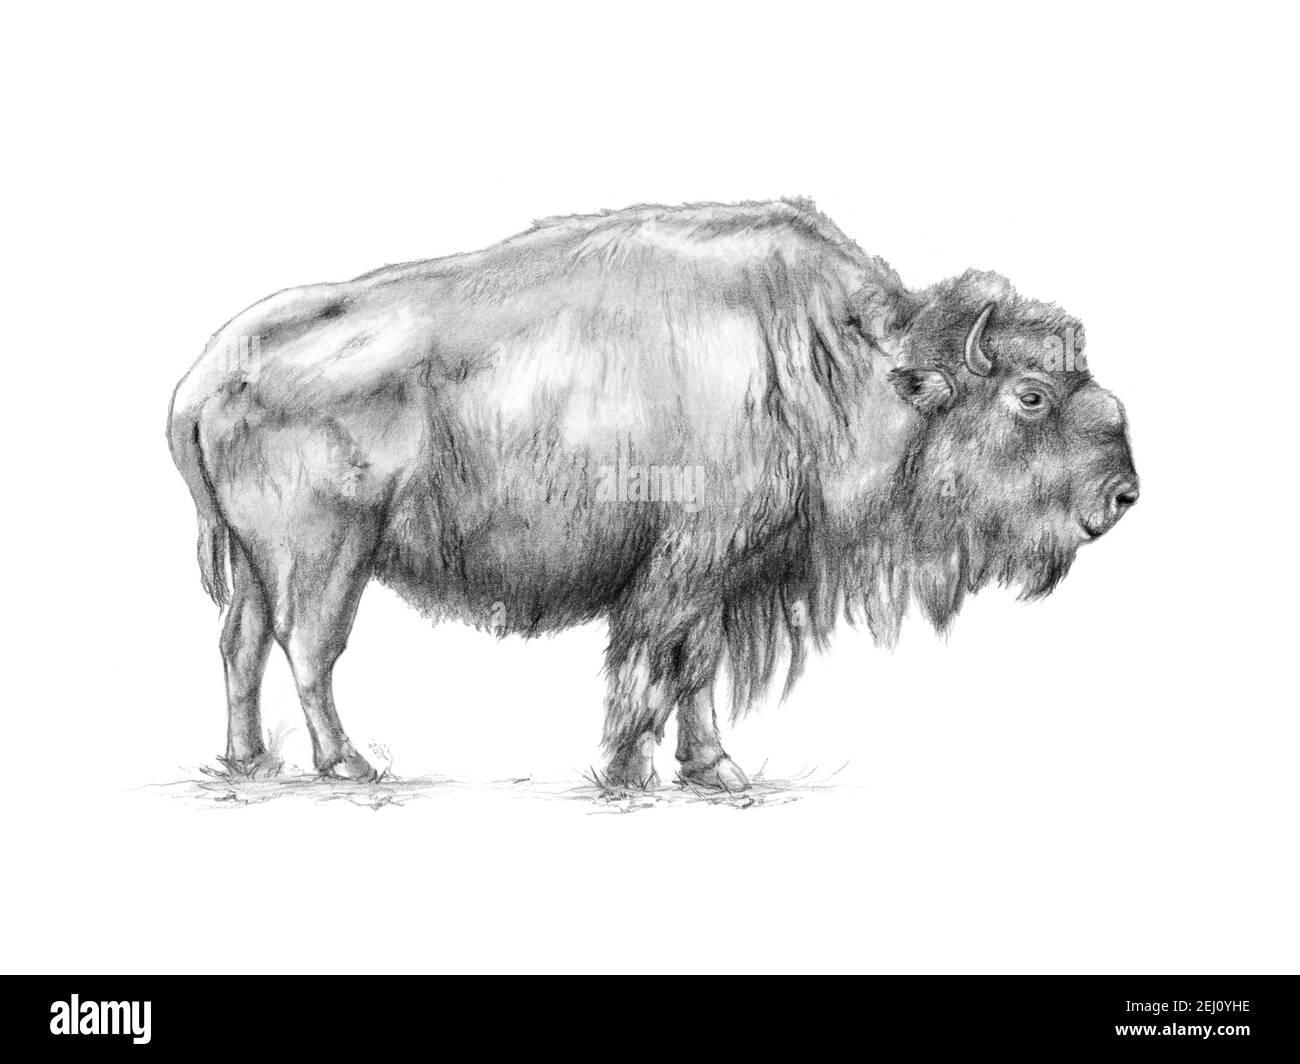 American bison (bison bison) graphite and charcoal portrait. Traditional illustration on paper. Stock Photo